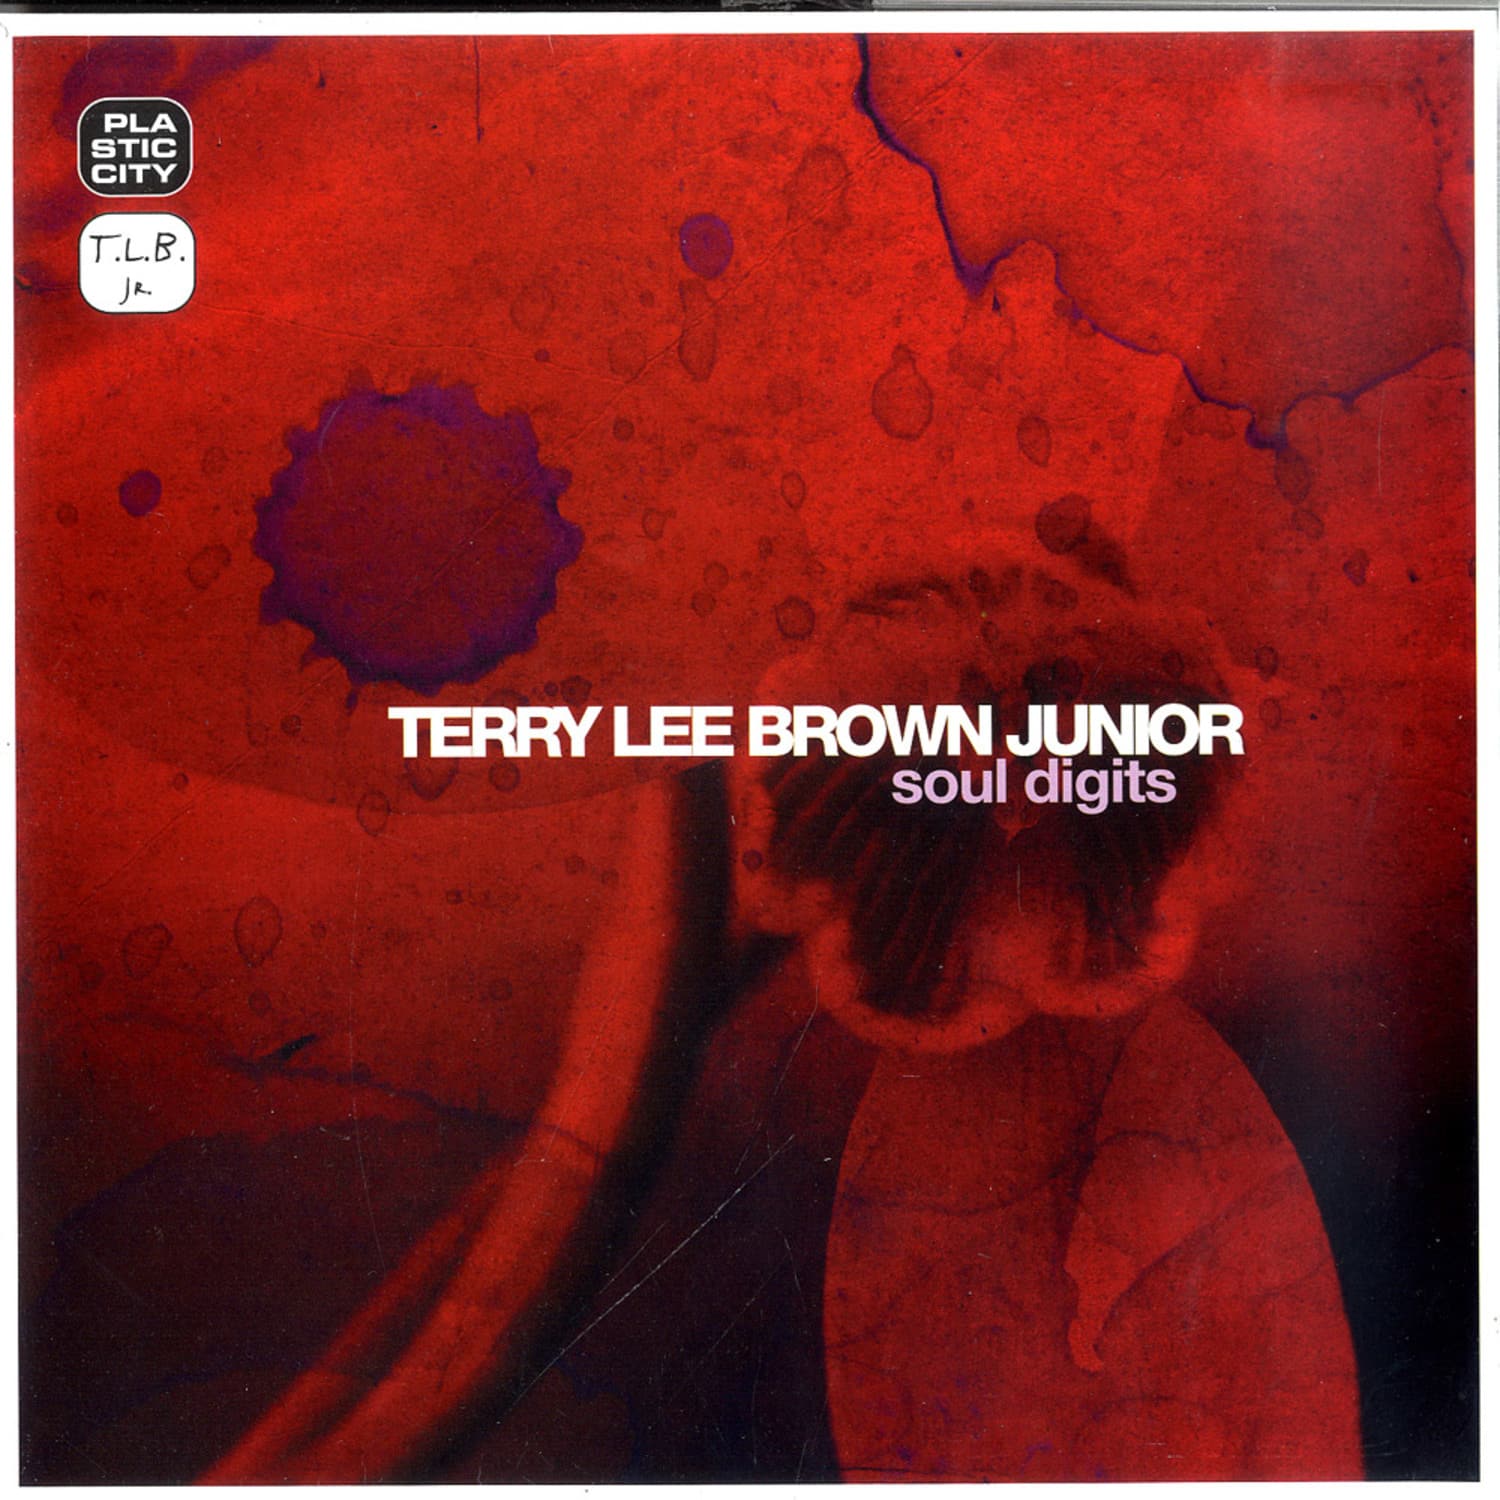 Terry Lee Brown Jr. - SOUL DIGITS 10 INCH / NICK CURLY RMX